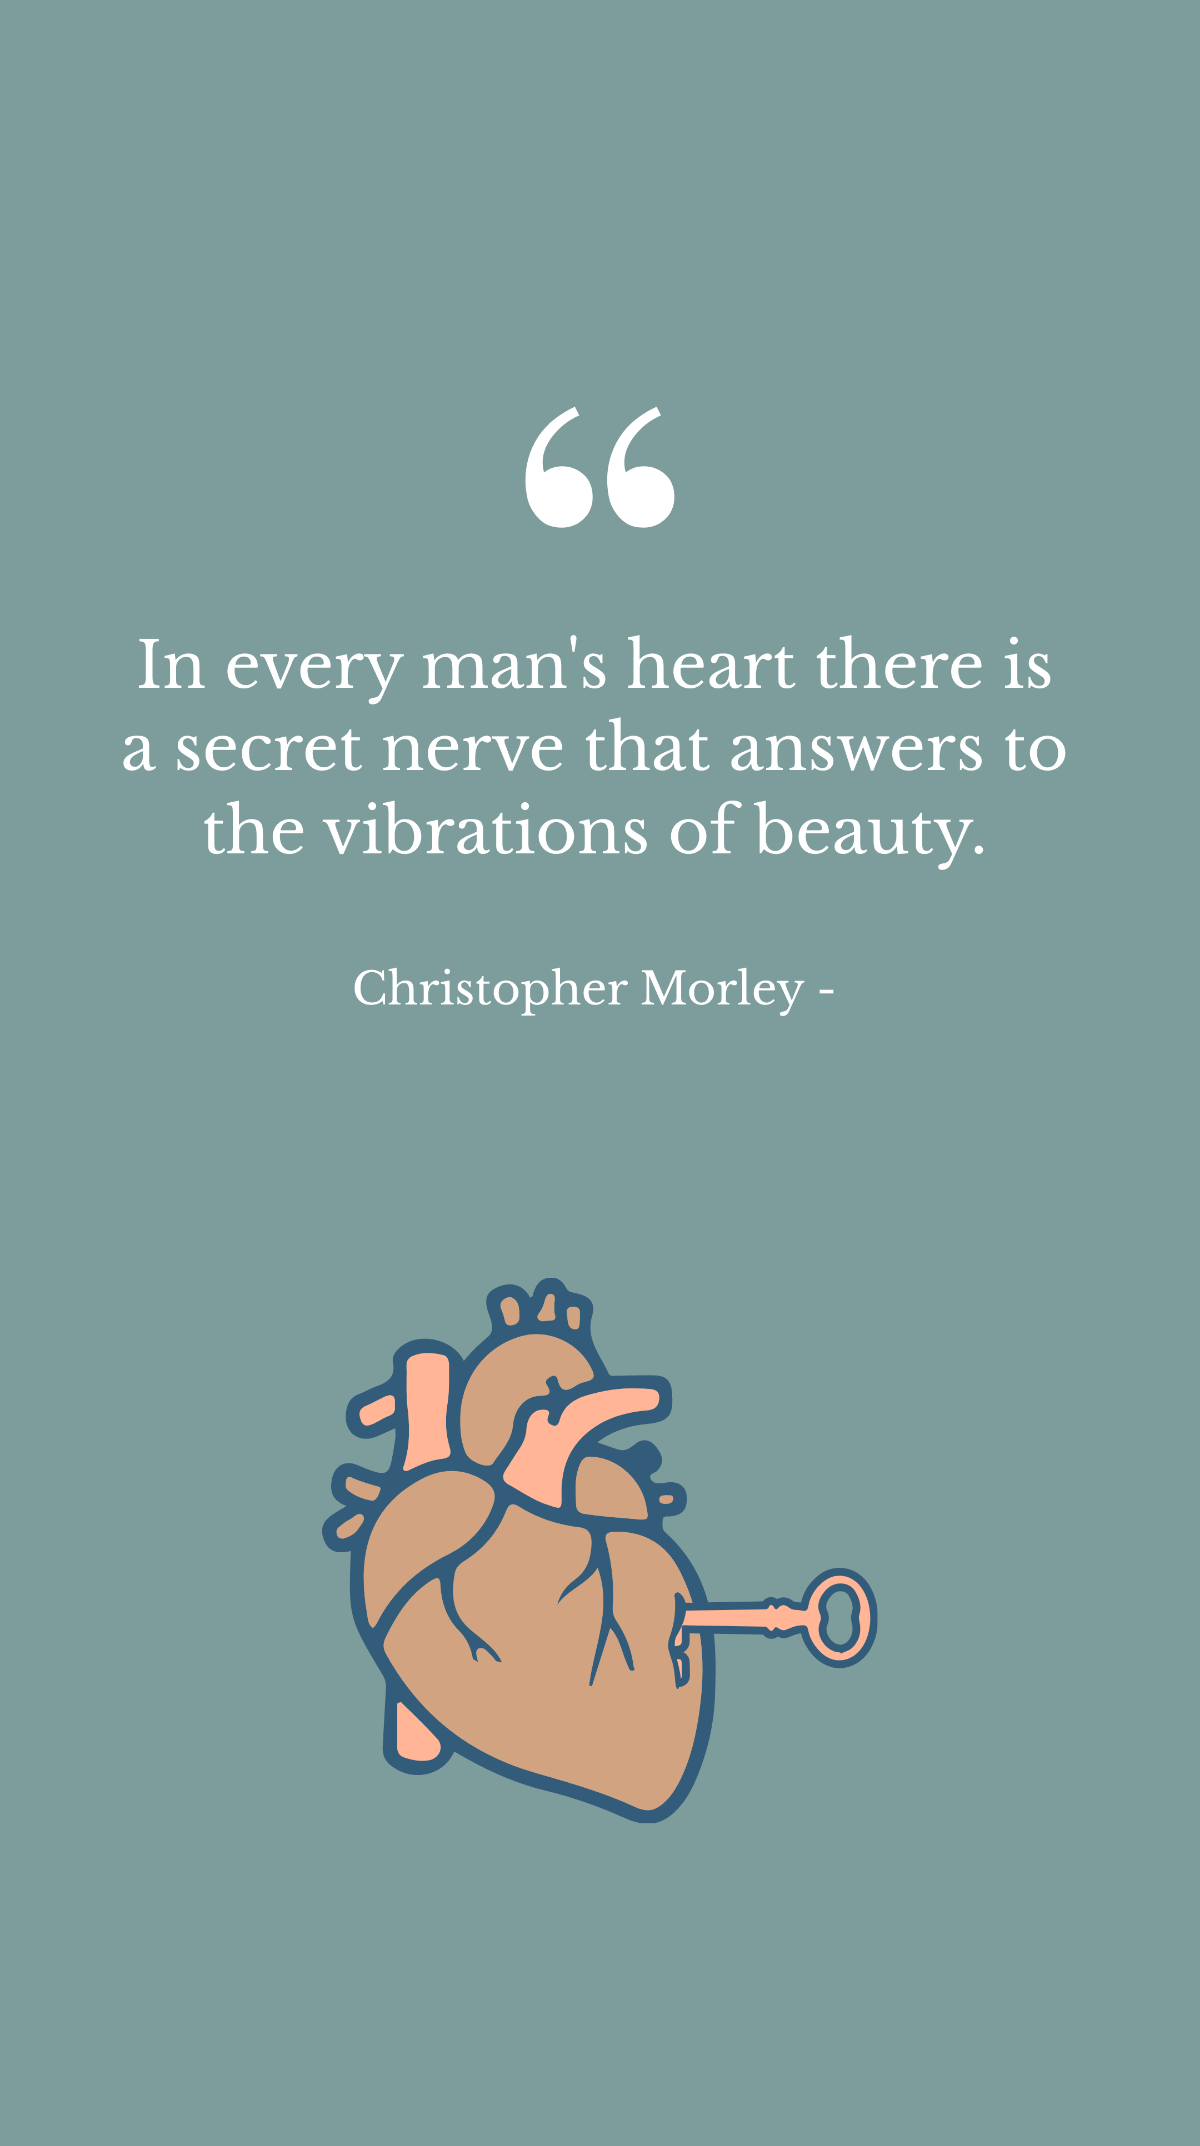 Christopher Morley - In every man's heart there is a secret nerve that answers to the vibrations of beauty. Template